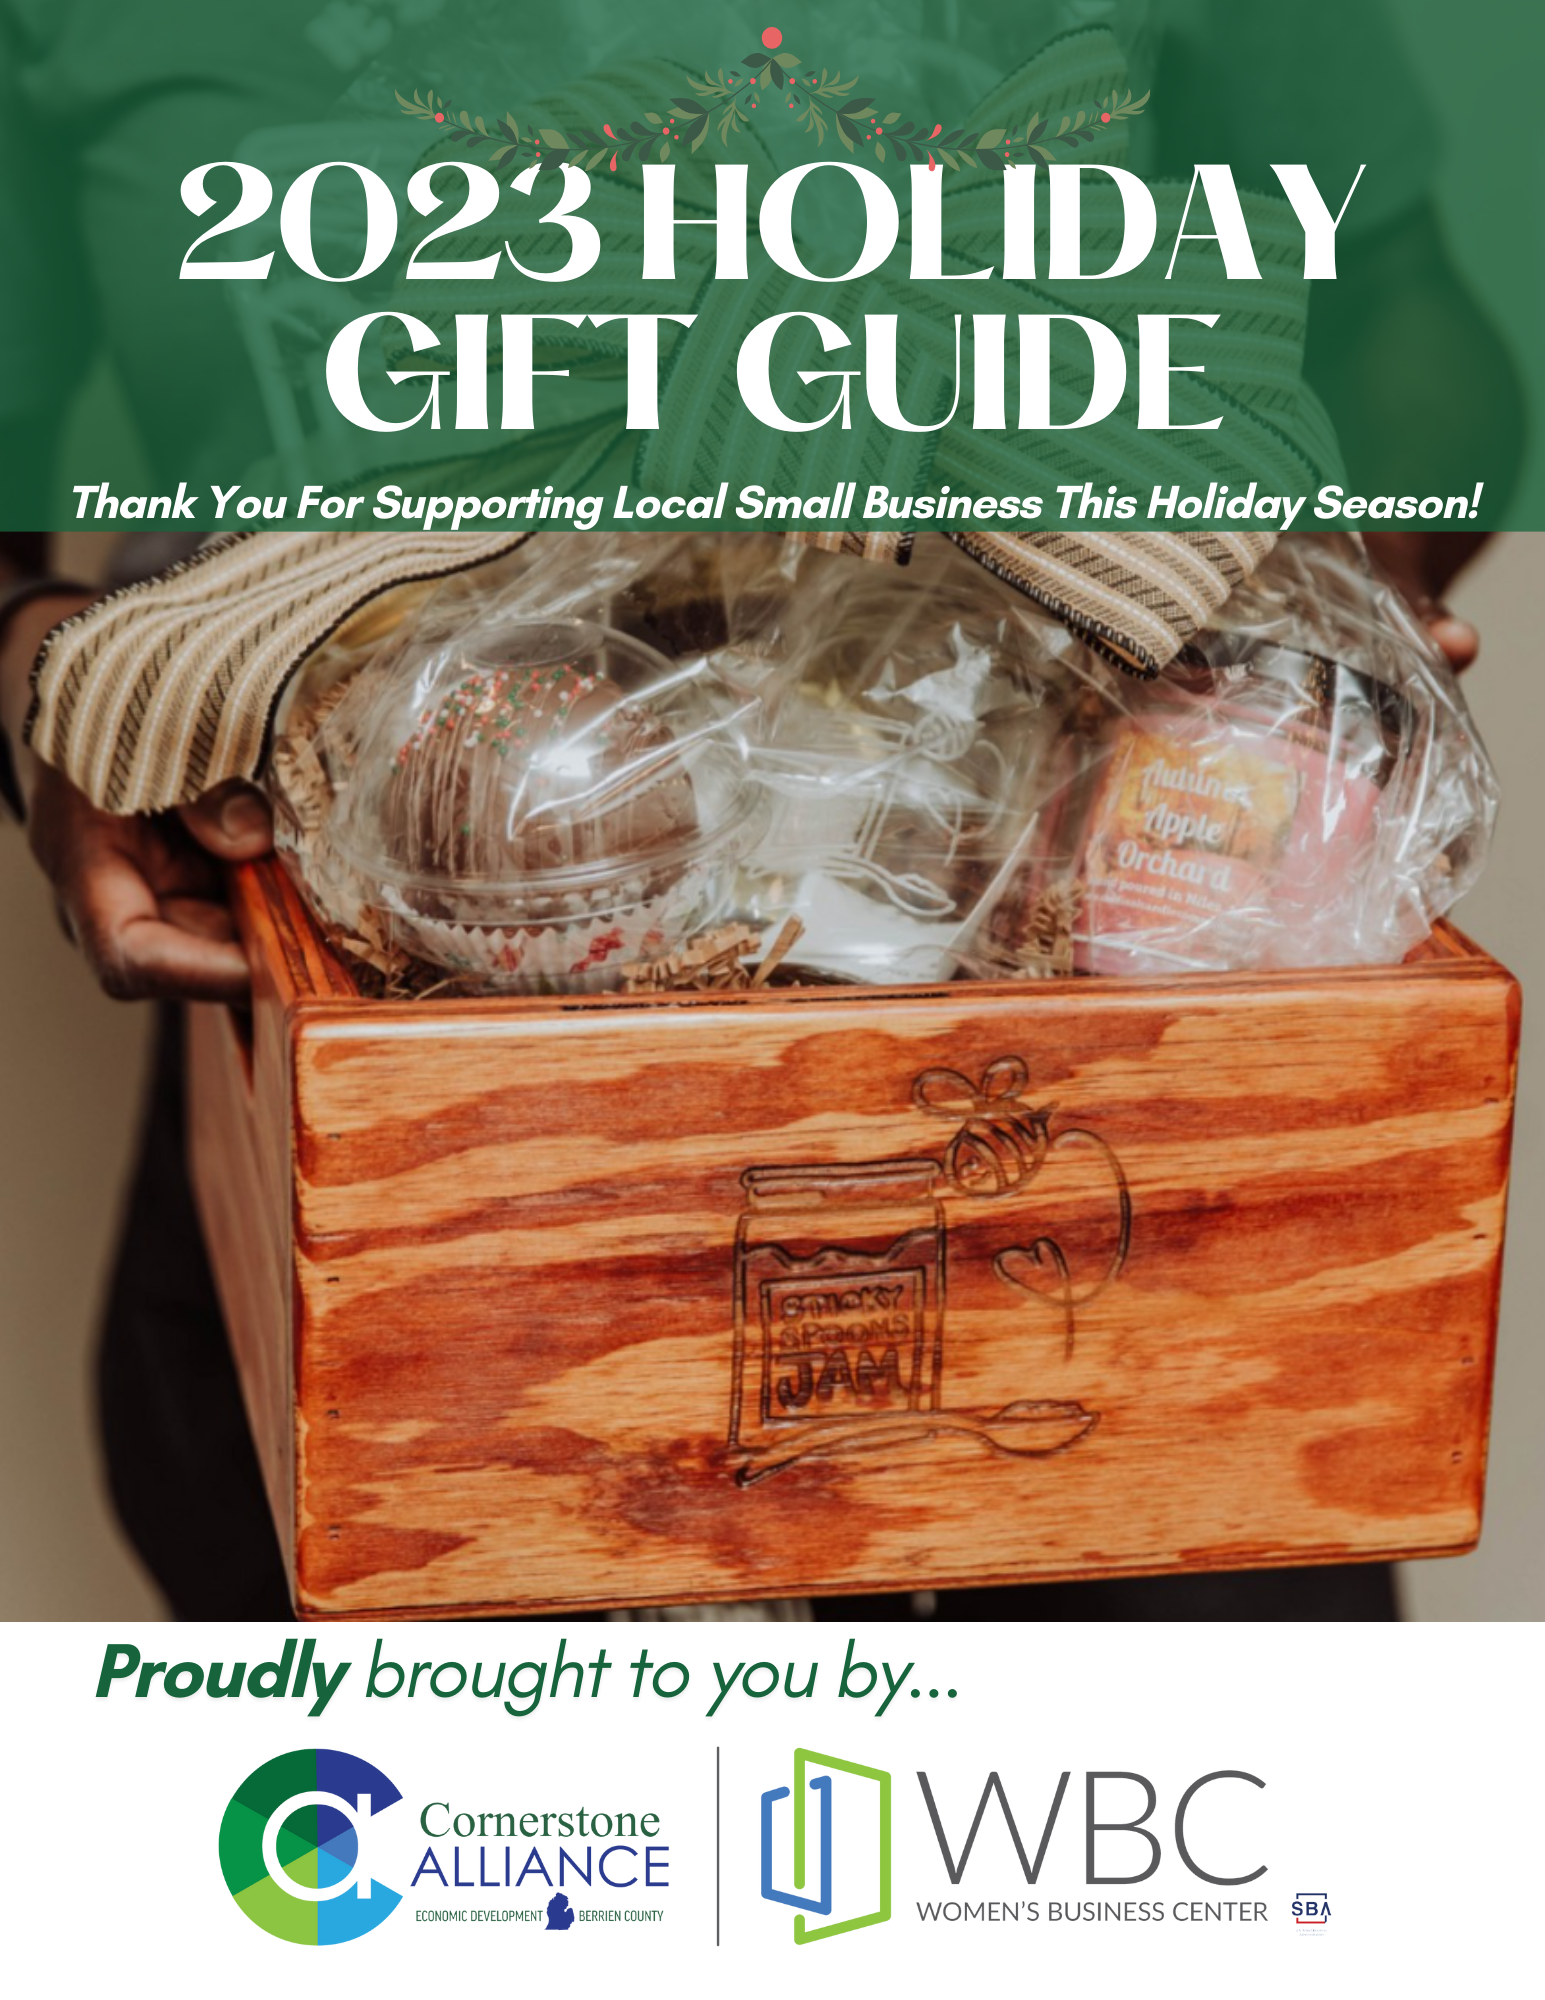 Holiday Gift Guide 2023 by Cornerstone Alliance The Womens Business Center